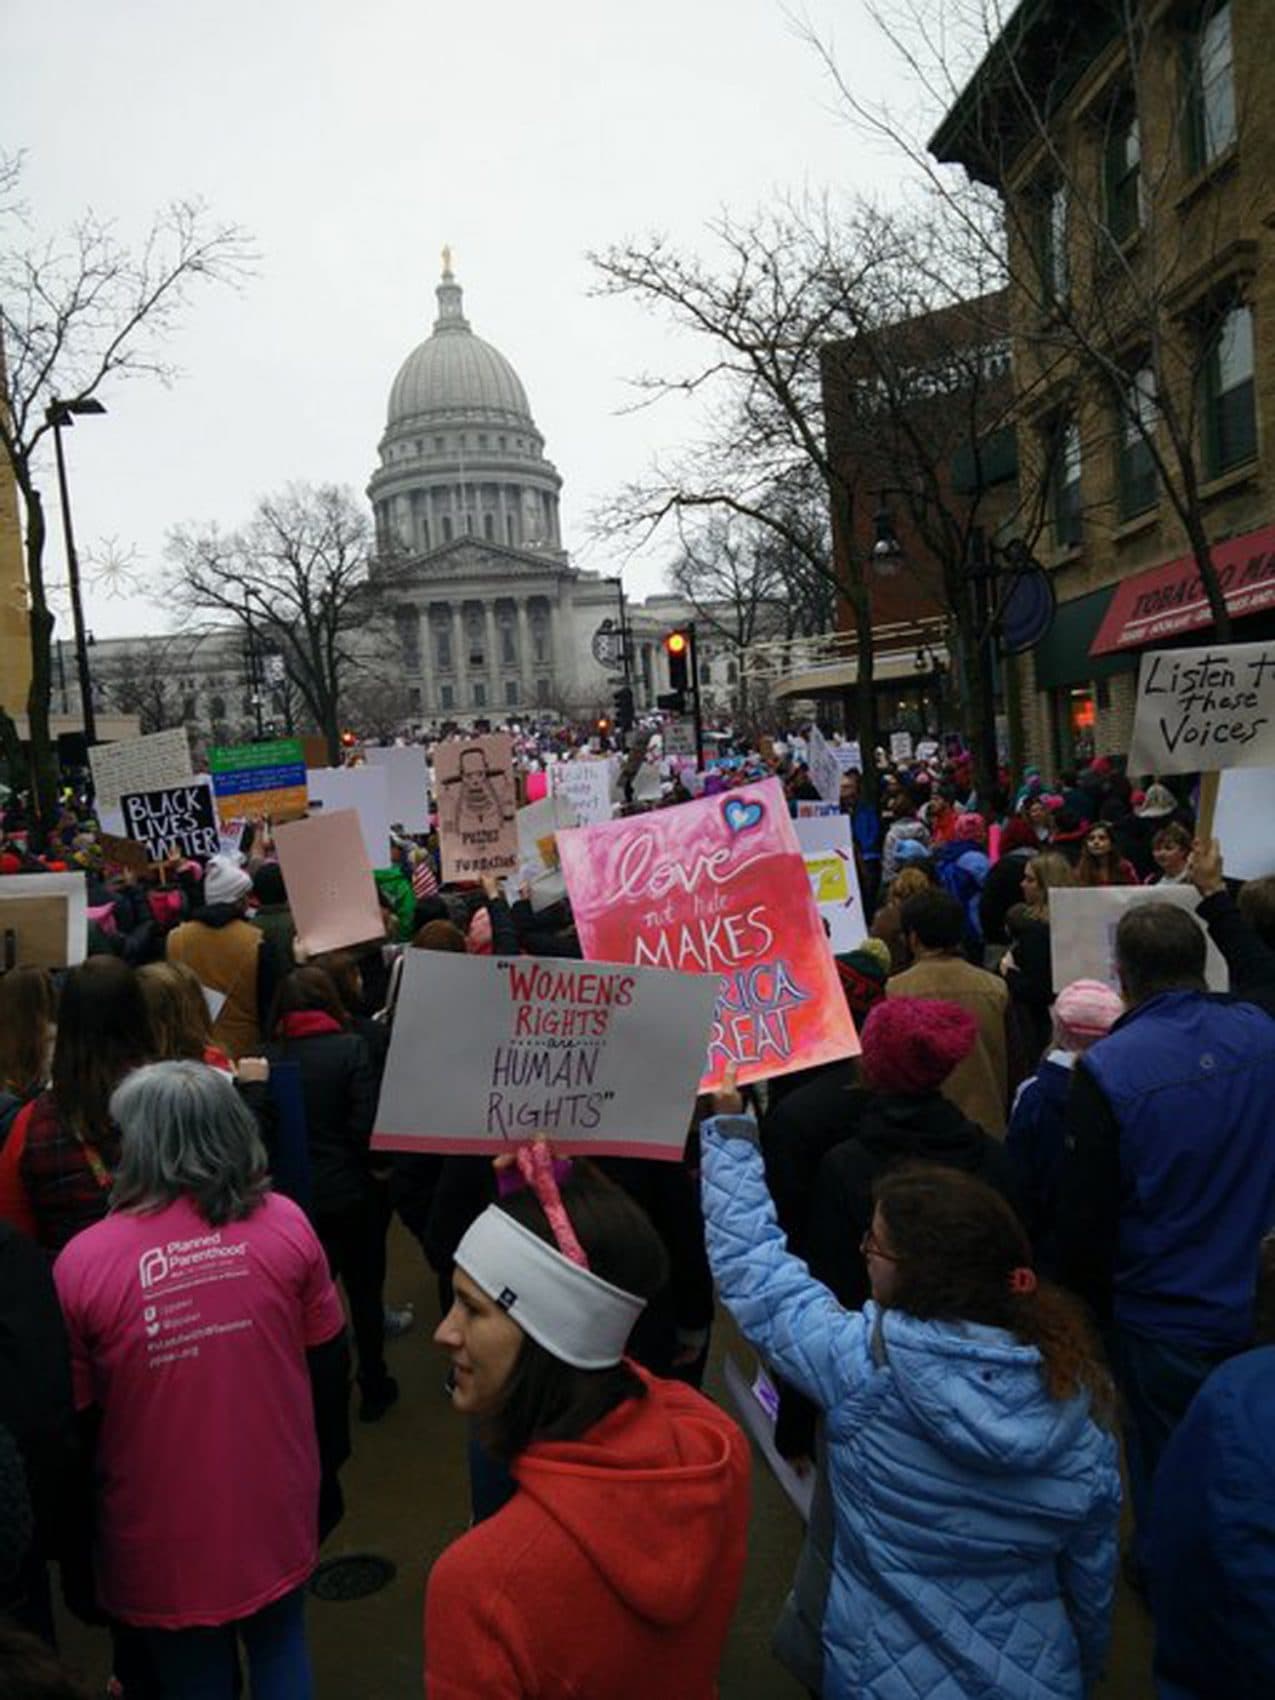 A shot of the Women's March in Madison, WI. (Courtesy @WritingBabe)